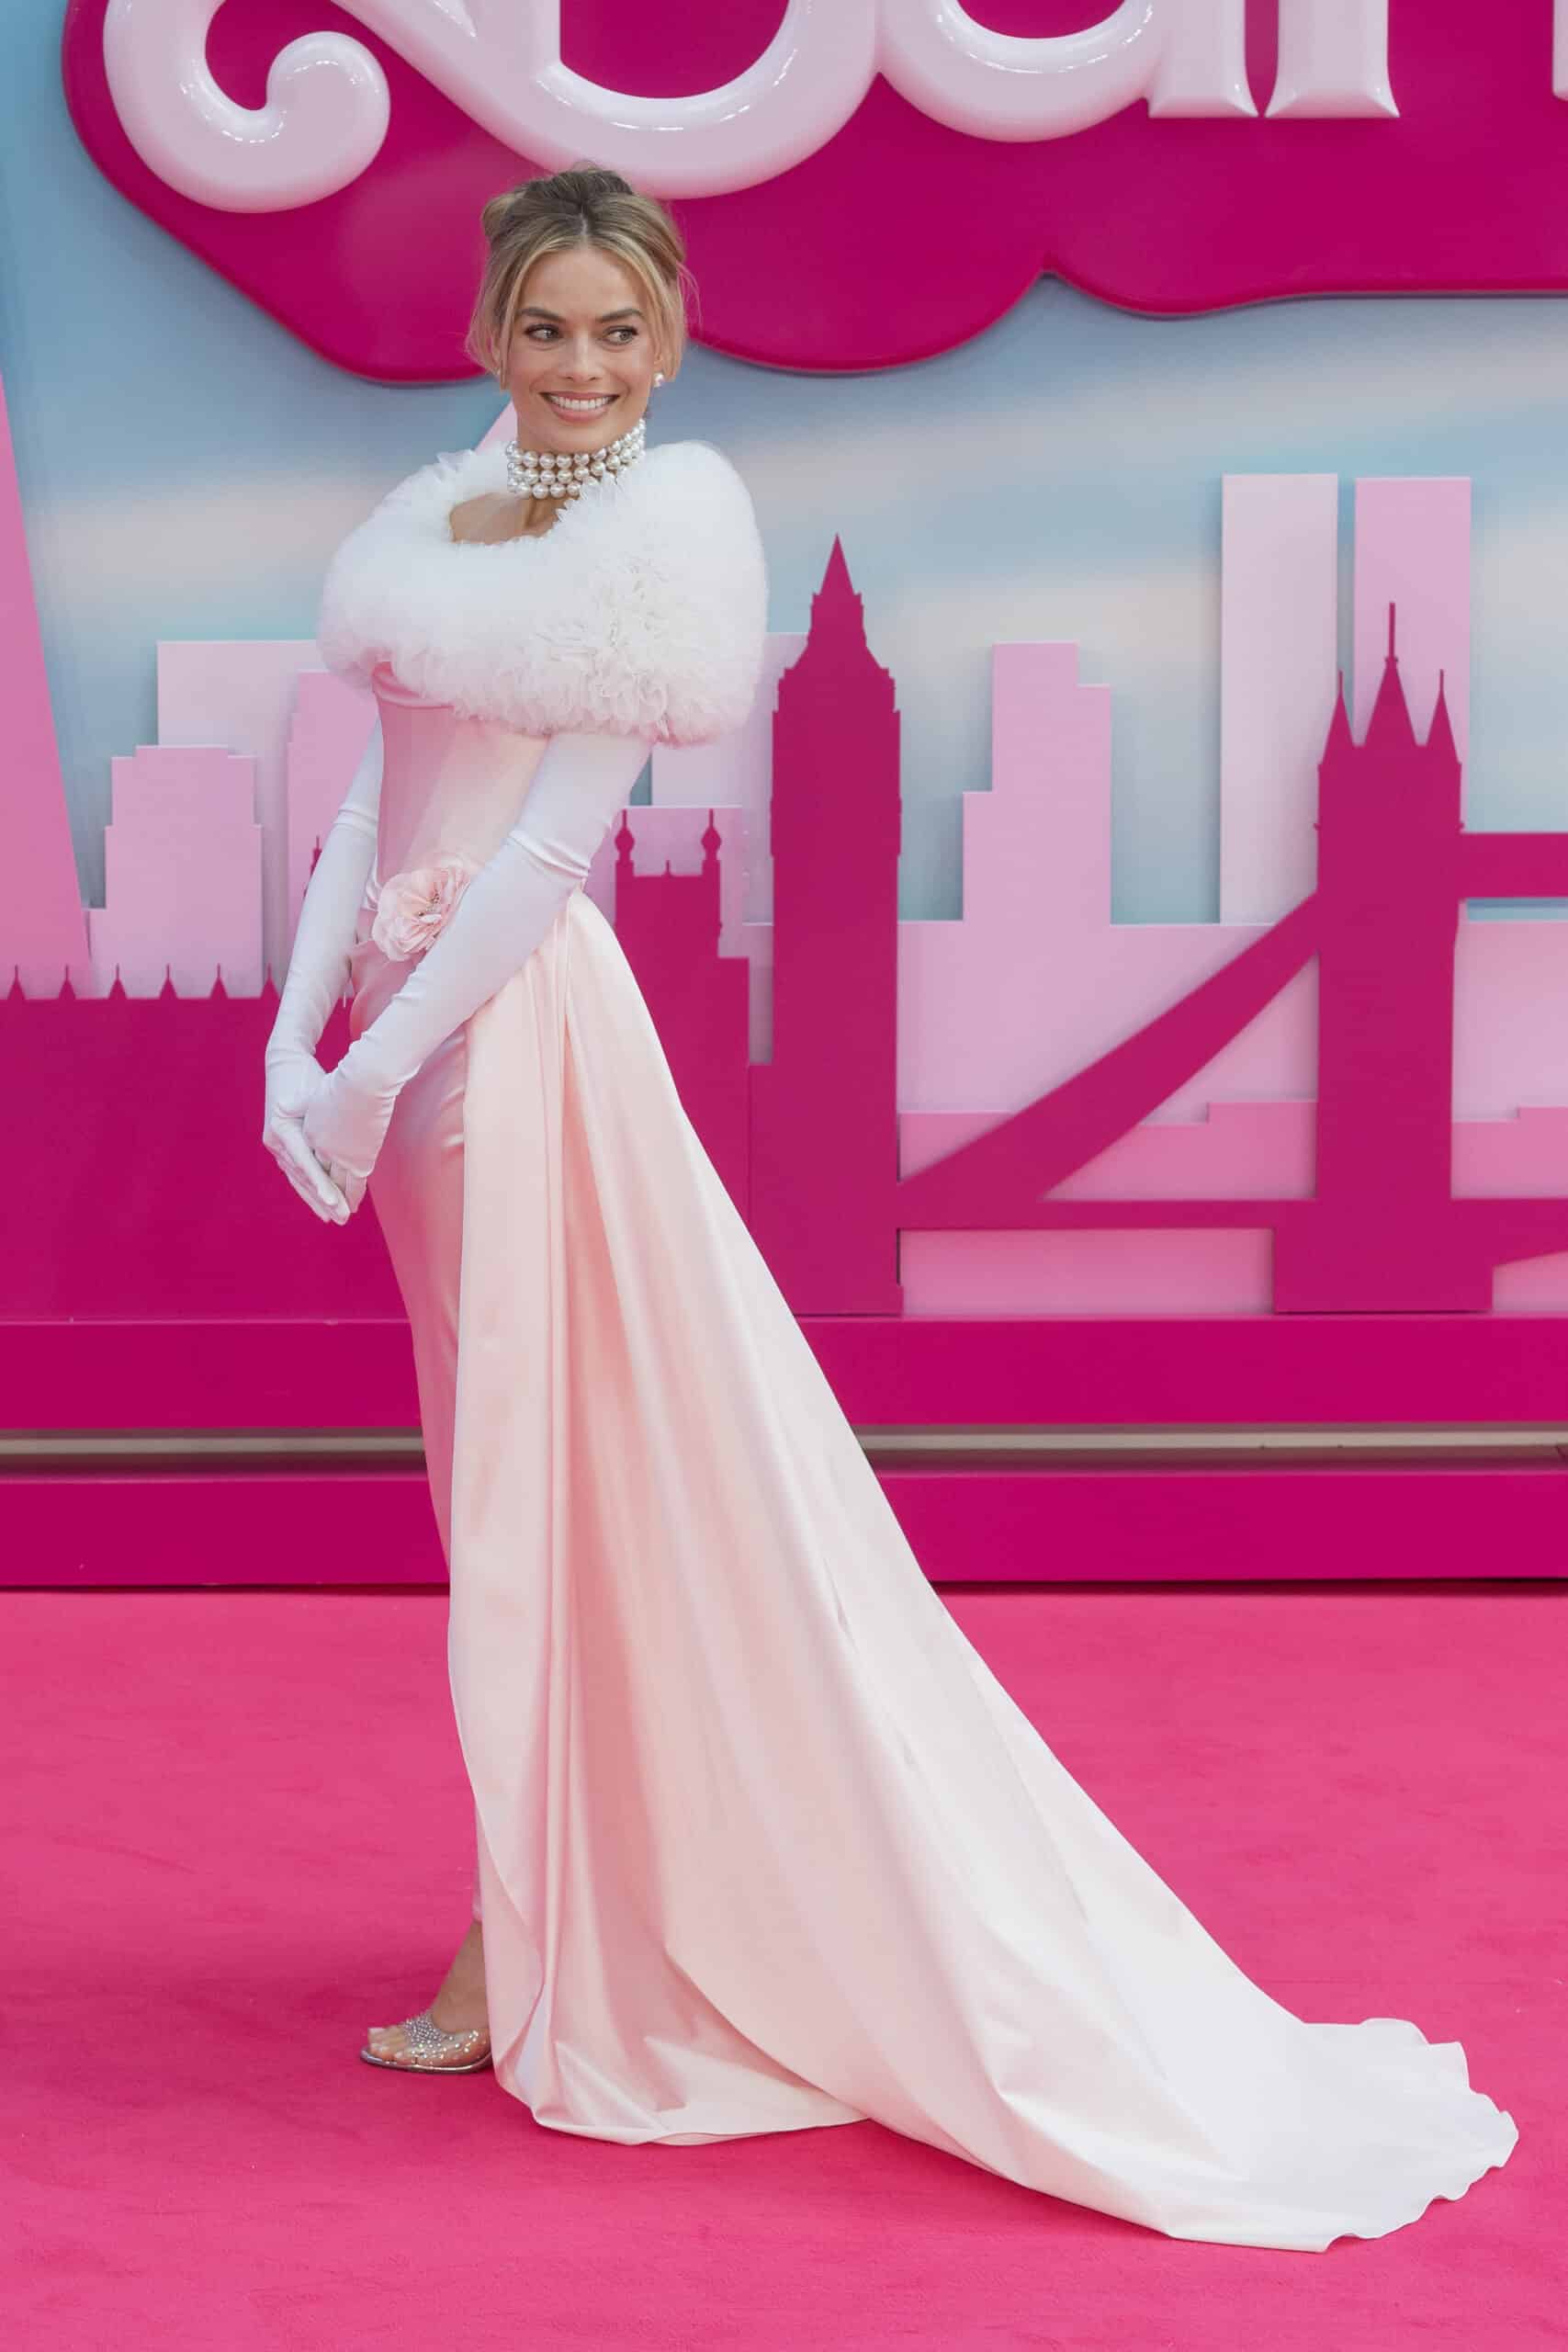 LONDON, UNITED KINGDOM - JULY 12: Margot Robbie attends the European premiere of 'Barbie' at the Cineworld Leicester Square in London, United Kingdom on July 12, 2023.